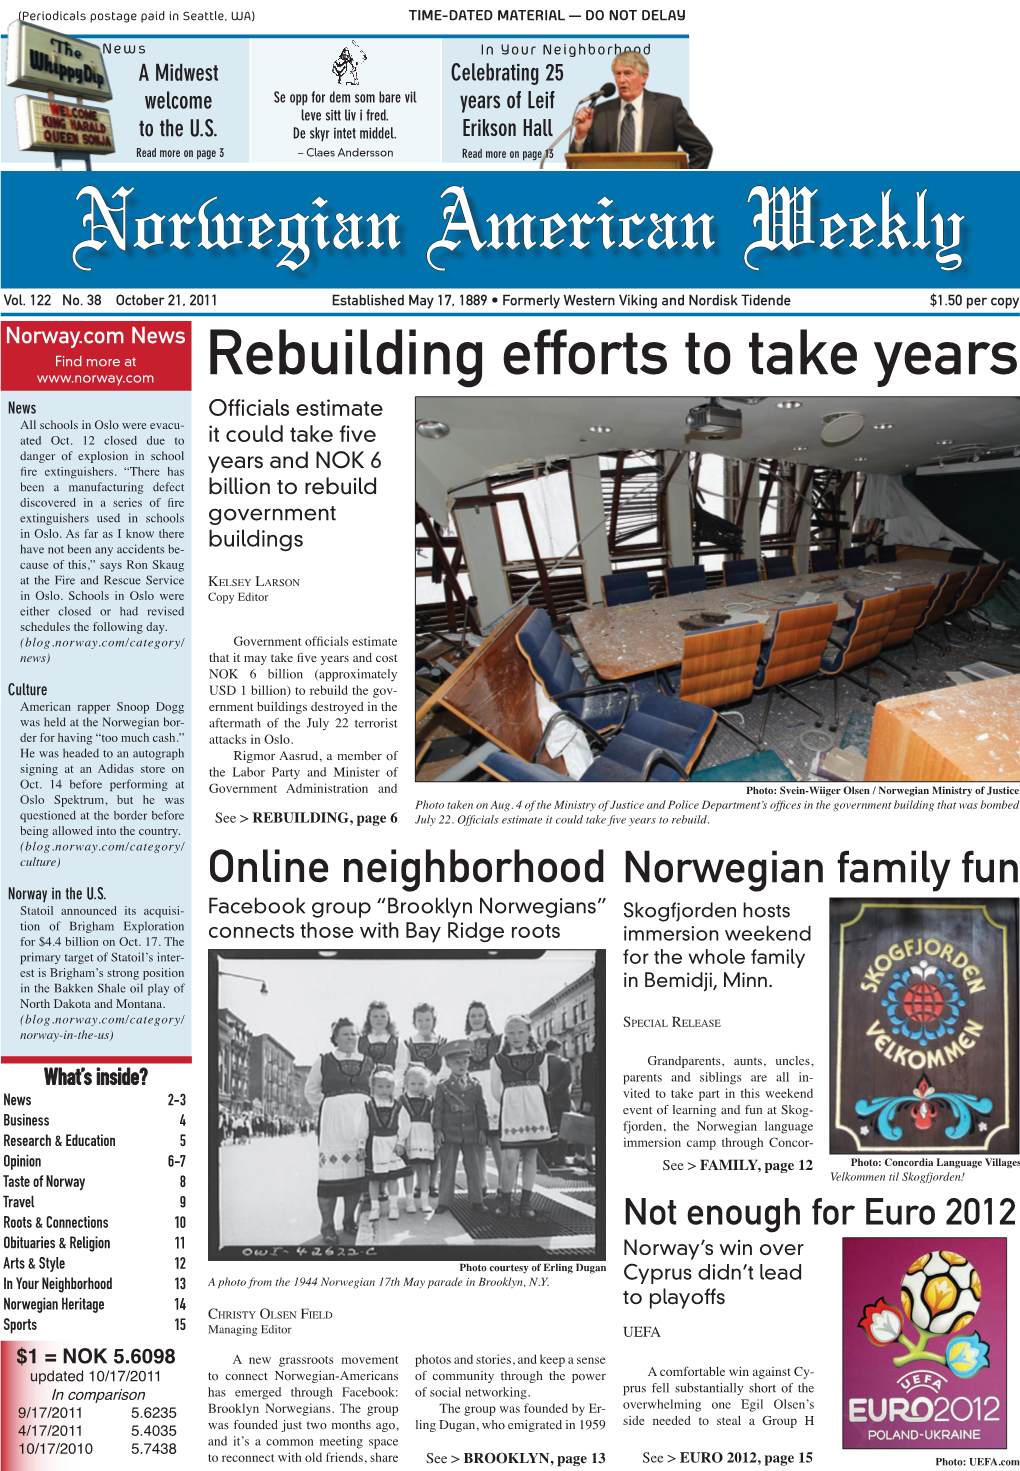 Rebuilding Efforts to Take Years News Officials Estimate All Schools in Oslo Were Evacu- Ated Oct